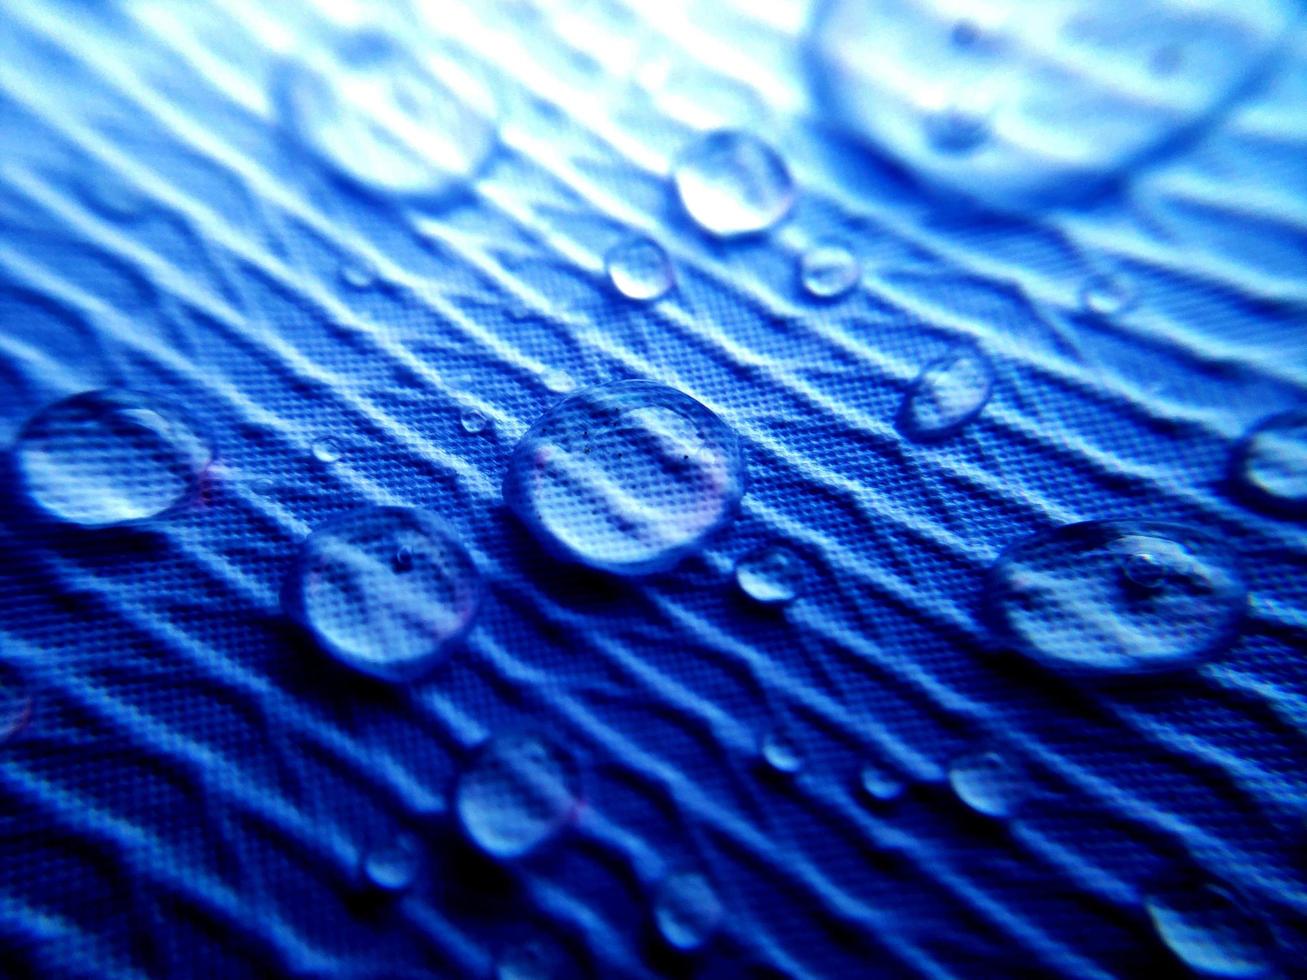 Water drop on fabric textured surface photo